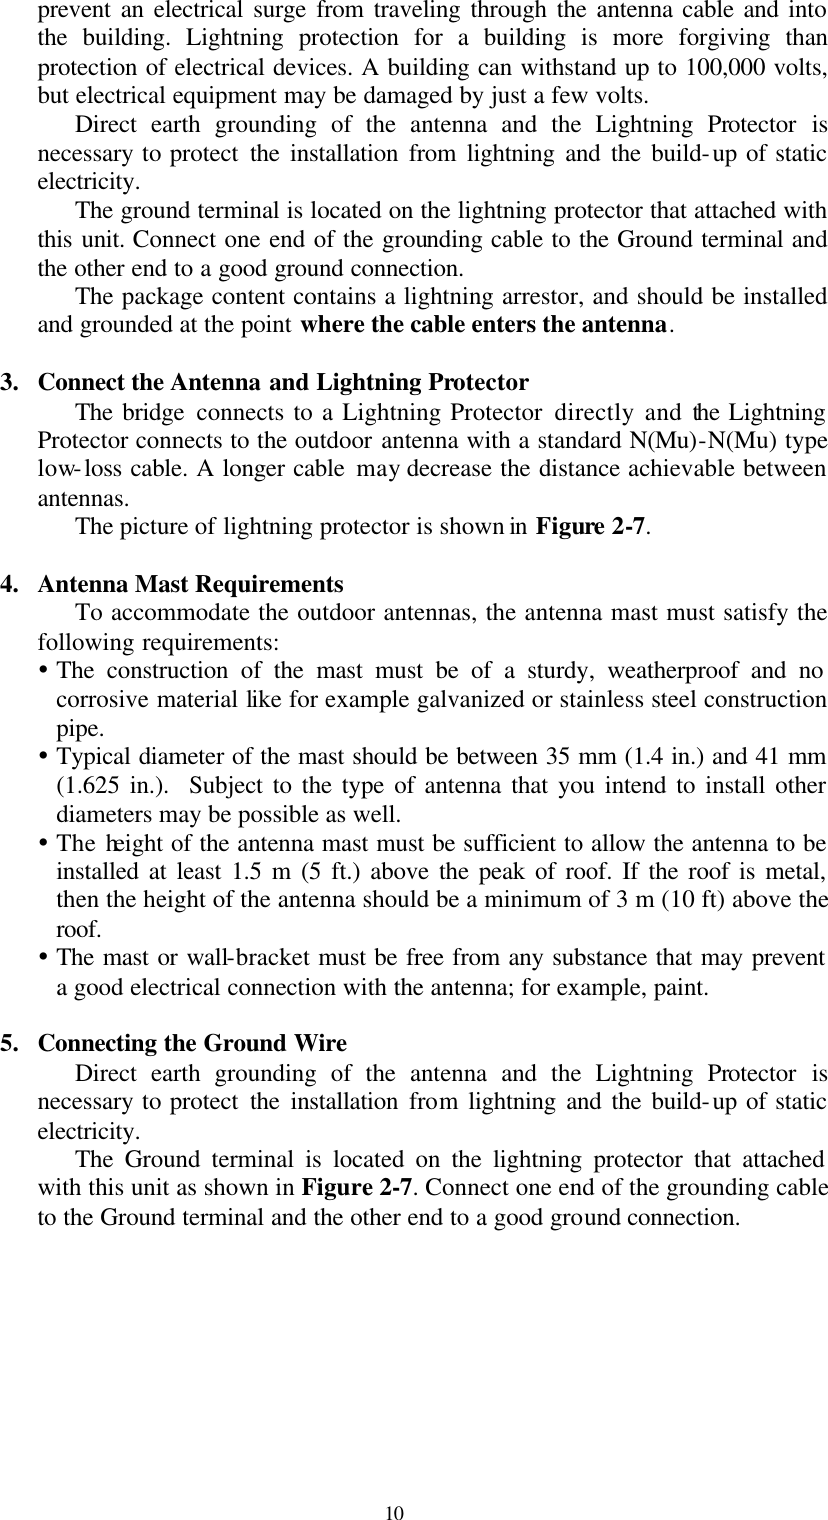  10 prevent an electrical surge from traveling through the antenna cable and into the building. Lightning protection for a building is more forgiving than protection of electrical devices. A building can withstand up to 100,000 volts, but electrical equipment may be damaged by just a few volts.   Direct earth grounding of the antenna and the Lightning Protector is necessary to protect the installation from lightning and the build-up of static electricity. The ground terminal is located on the lightning protector that attached with this unit. Connect one end of the grounding cable to the Ground terminal and the other end to a good ground connection. The package content contains a lightning arrestor, and should be installed and grounded at the point where the cable enters the antenna.  3. Connect the Antenna and Lightning Protector The bridge connects to a Lightning Protector directly and the Lightning Protector connects to the outdoor antenna with a standard N(Mu)-N(Mu) type low-loss cable. A longer cable may decrease the distance achievable between antennas. The picture of lightning protector is shown in Figure 2-7.  4. Antenna Mast Requirements To accommodate the outdoor antennas, the antenna mast must satisfy the following requirements: Ÿ The construction of the mast must be of a sturdy, weatherproof and no corrosive material like for example galvanized or stainless steel construction pipe. Ÿ Typical diameter of the mast should be between 35 mm (1.4 in.) and 41 mm (1.625 in.).  Subject to the type of antenna that you intend to install other diameters may be possible as well. Ÿ The height of the antenna mast must be sufficient to allow the antenna to be installed at least 1.5 m (5 ft.) above the peak of roof. If the roof is metal, then the height of the antenna should be a minimum of 3 m (10 ft) above the roof. Ÿ The mast or wall-bracket must be free from any substance that may prevent a good electrical connection with the antenna; for example, paint.  5. Connecting the Ground Wire Direct earth grounding of the antenna and the Lightning Protector is necessary to protect the installation from lightning and the build-up of static electricity. The Ground terminal is located on the lightning protector that attached with this unit as shown in Figure 2-7. Connect one end of the grounding cable to the Ground terminal and the other end to a good ground connection.  